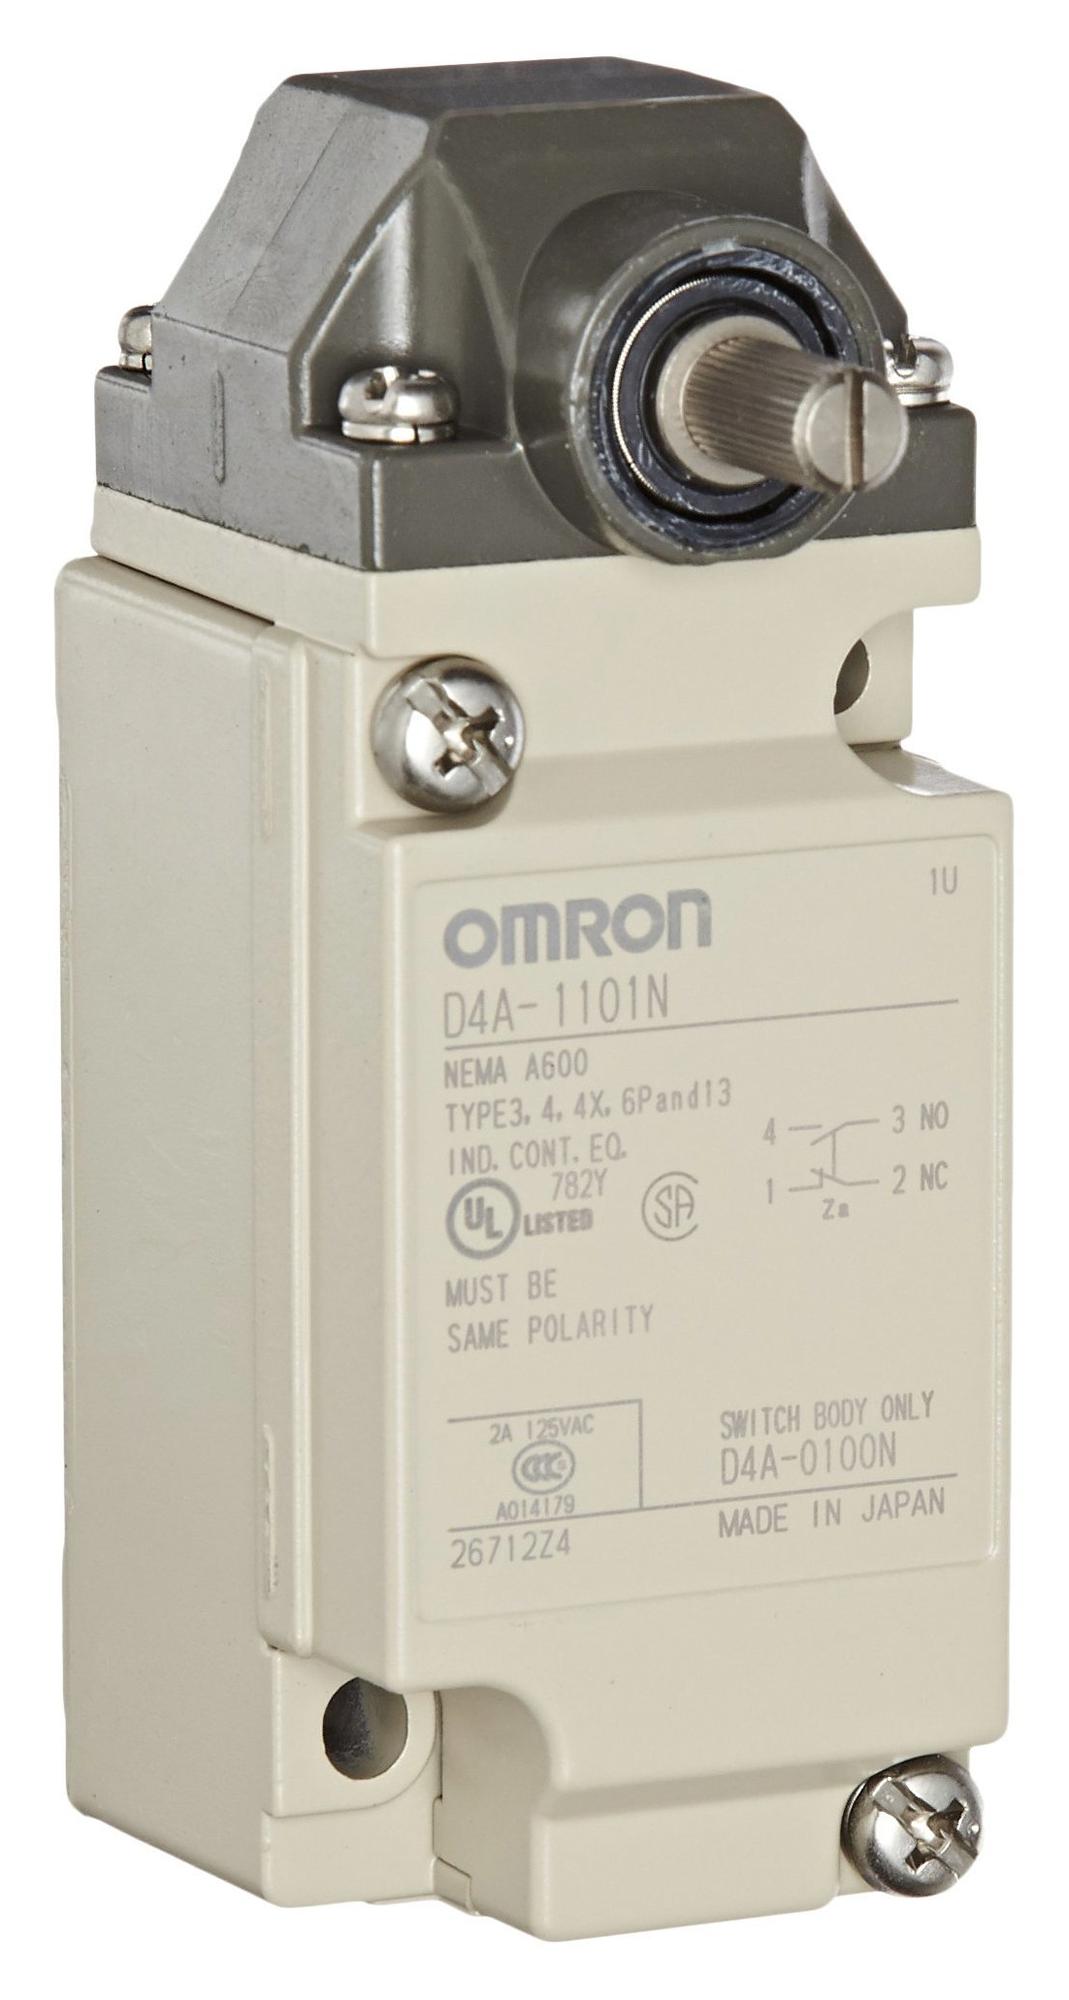 OMRON Limit Switch D4A-1101N LIMIT SWITCH SWITCHES OMRON 3413213 D4A-1101N